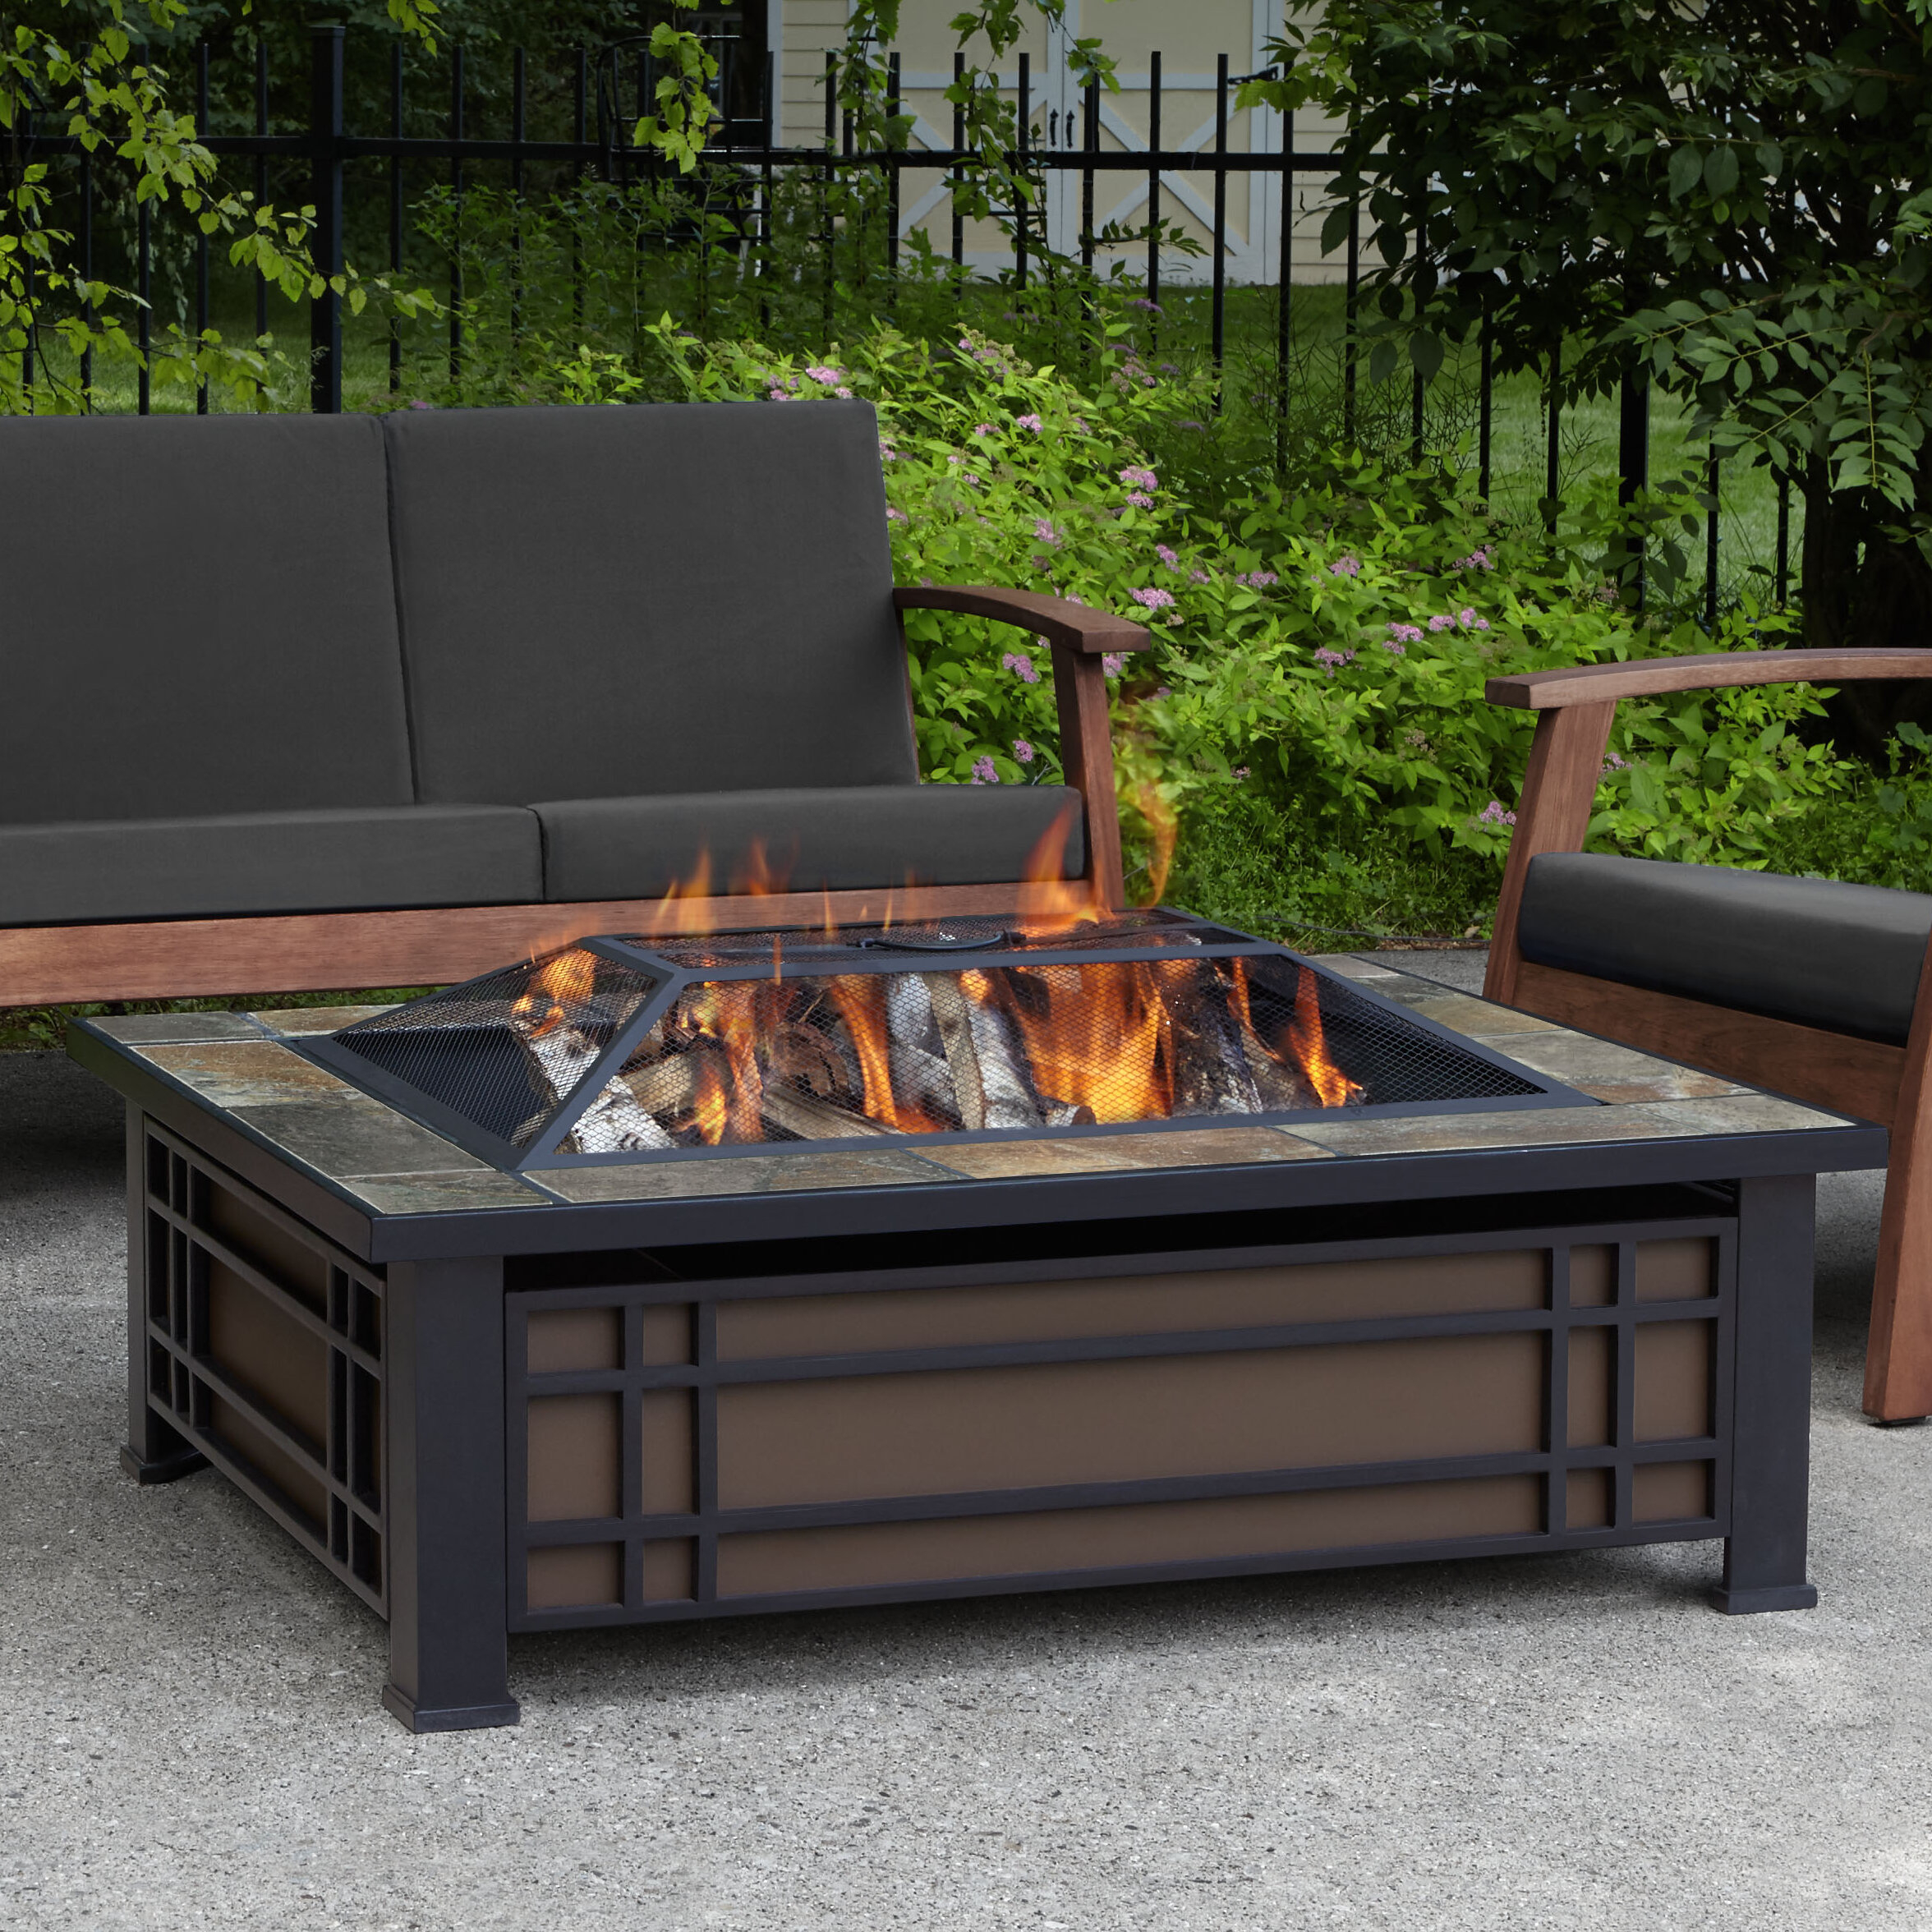 Details about   Large Fire Pit Backyard Wood Burning Patio Deck Stove Fireplace Table Outdoor 